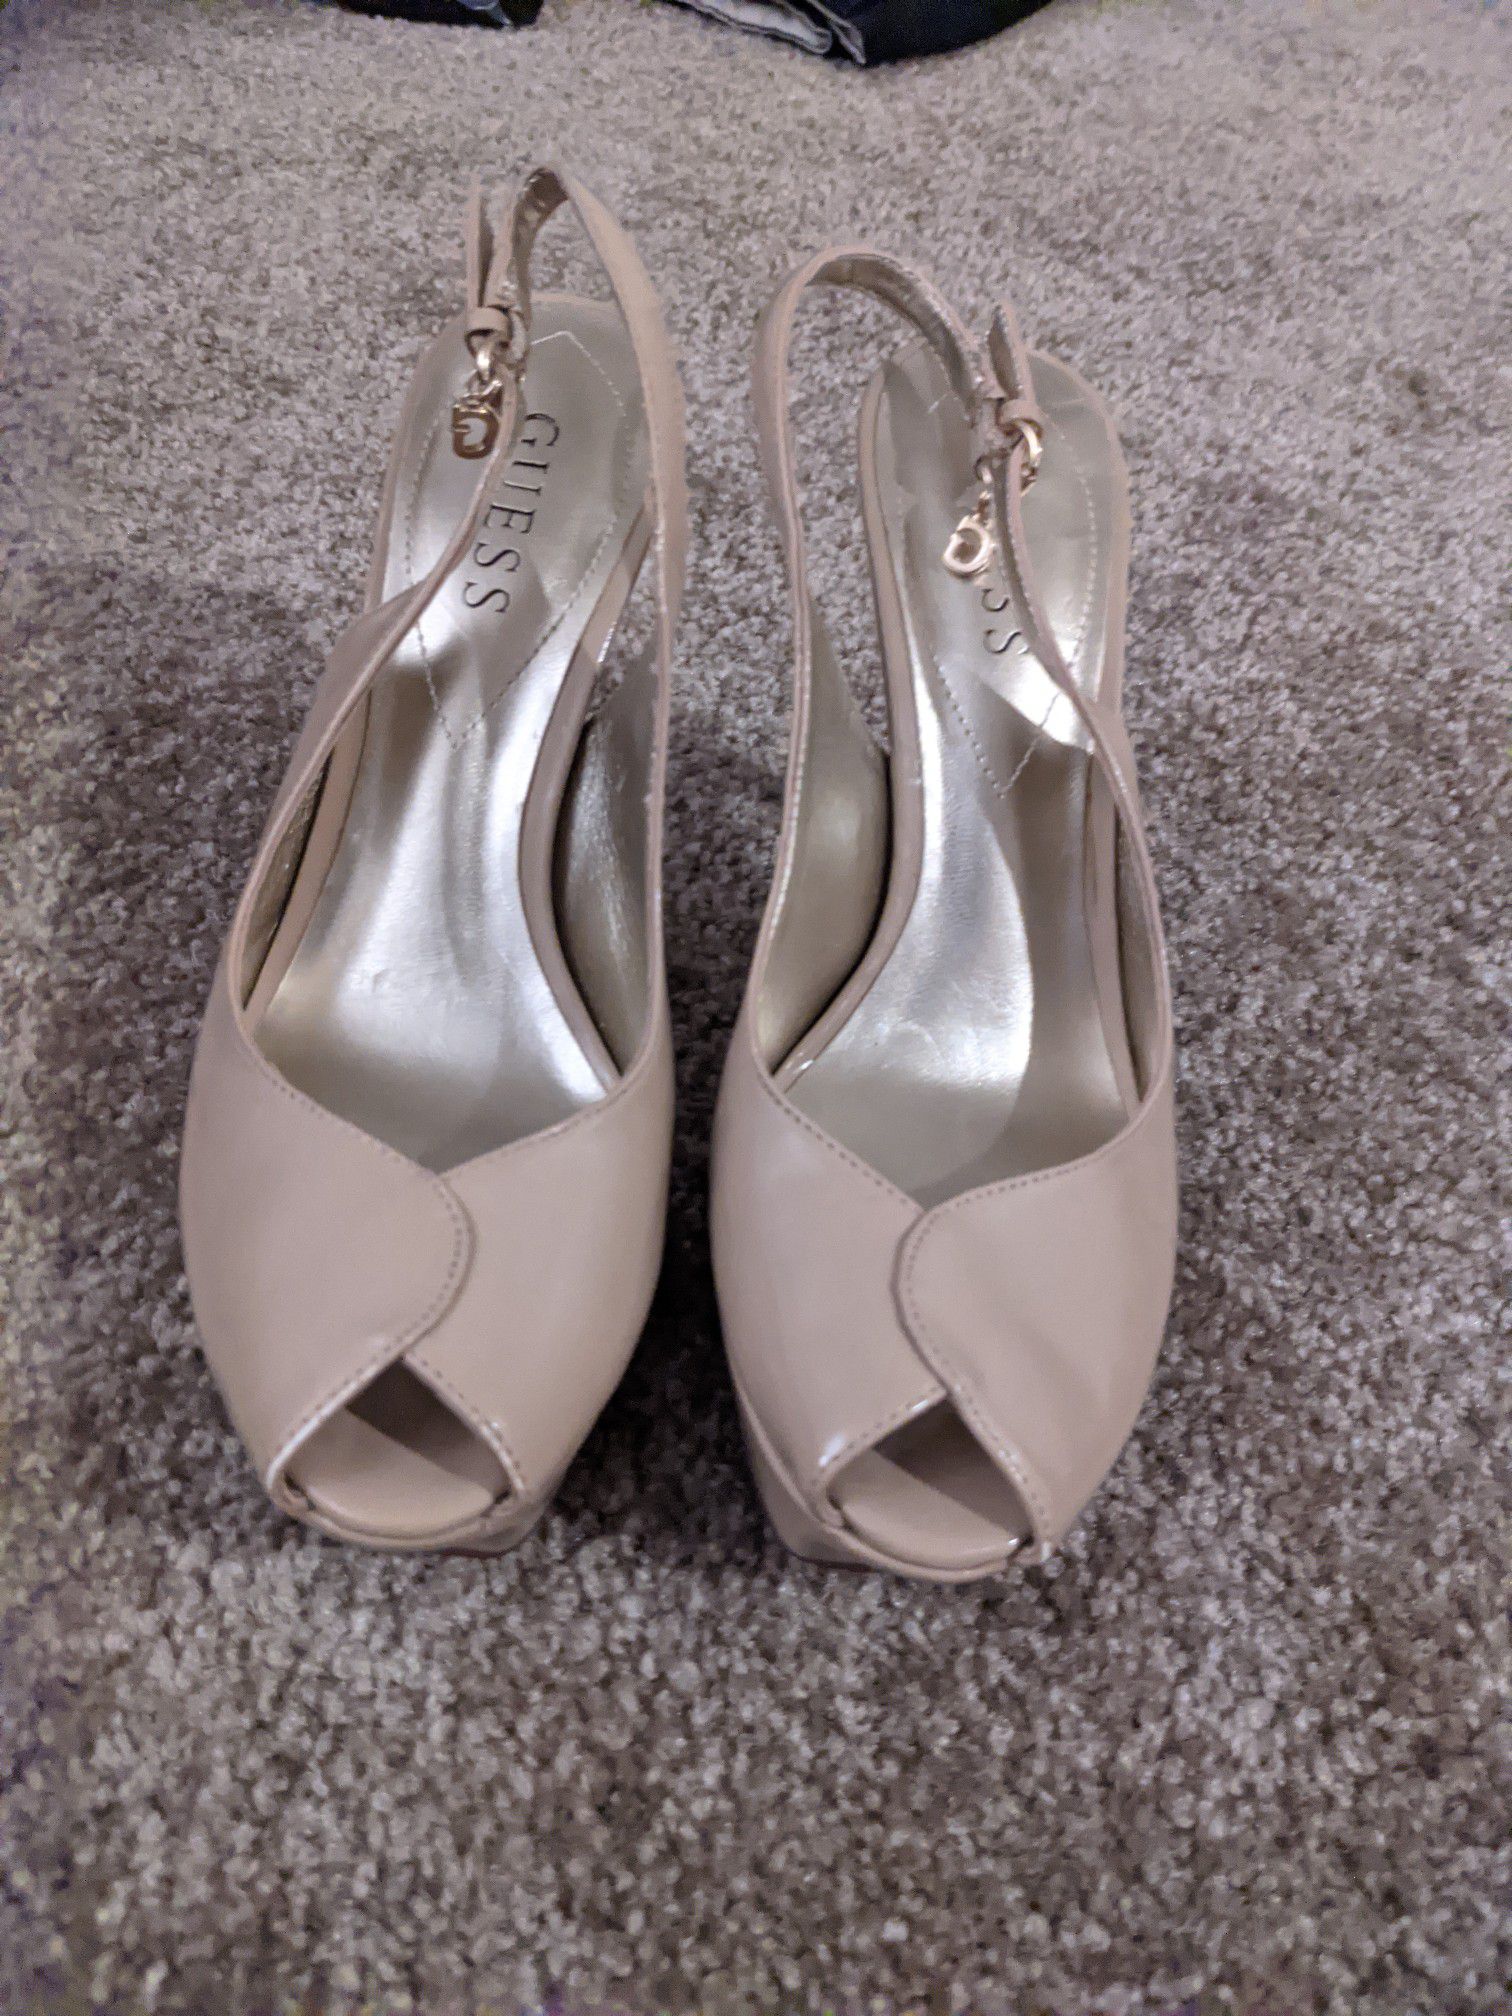 Guess heels size 6.5